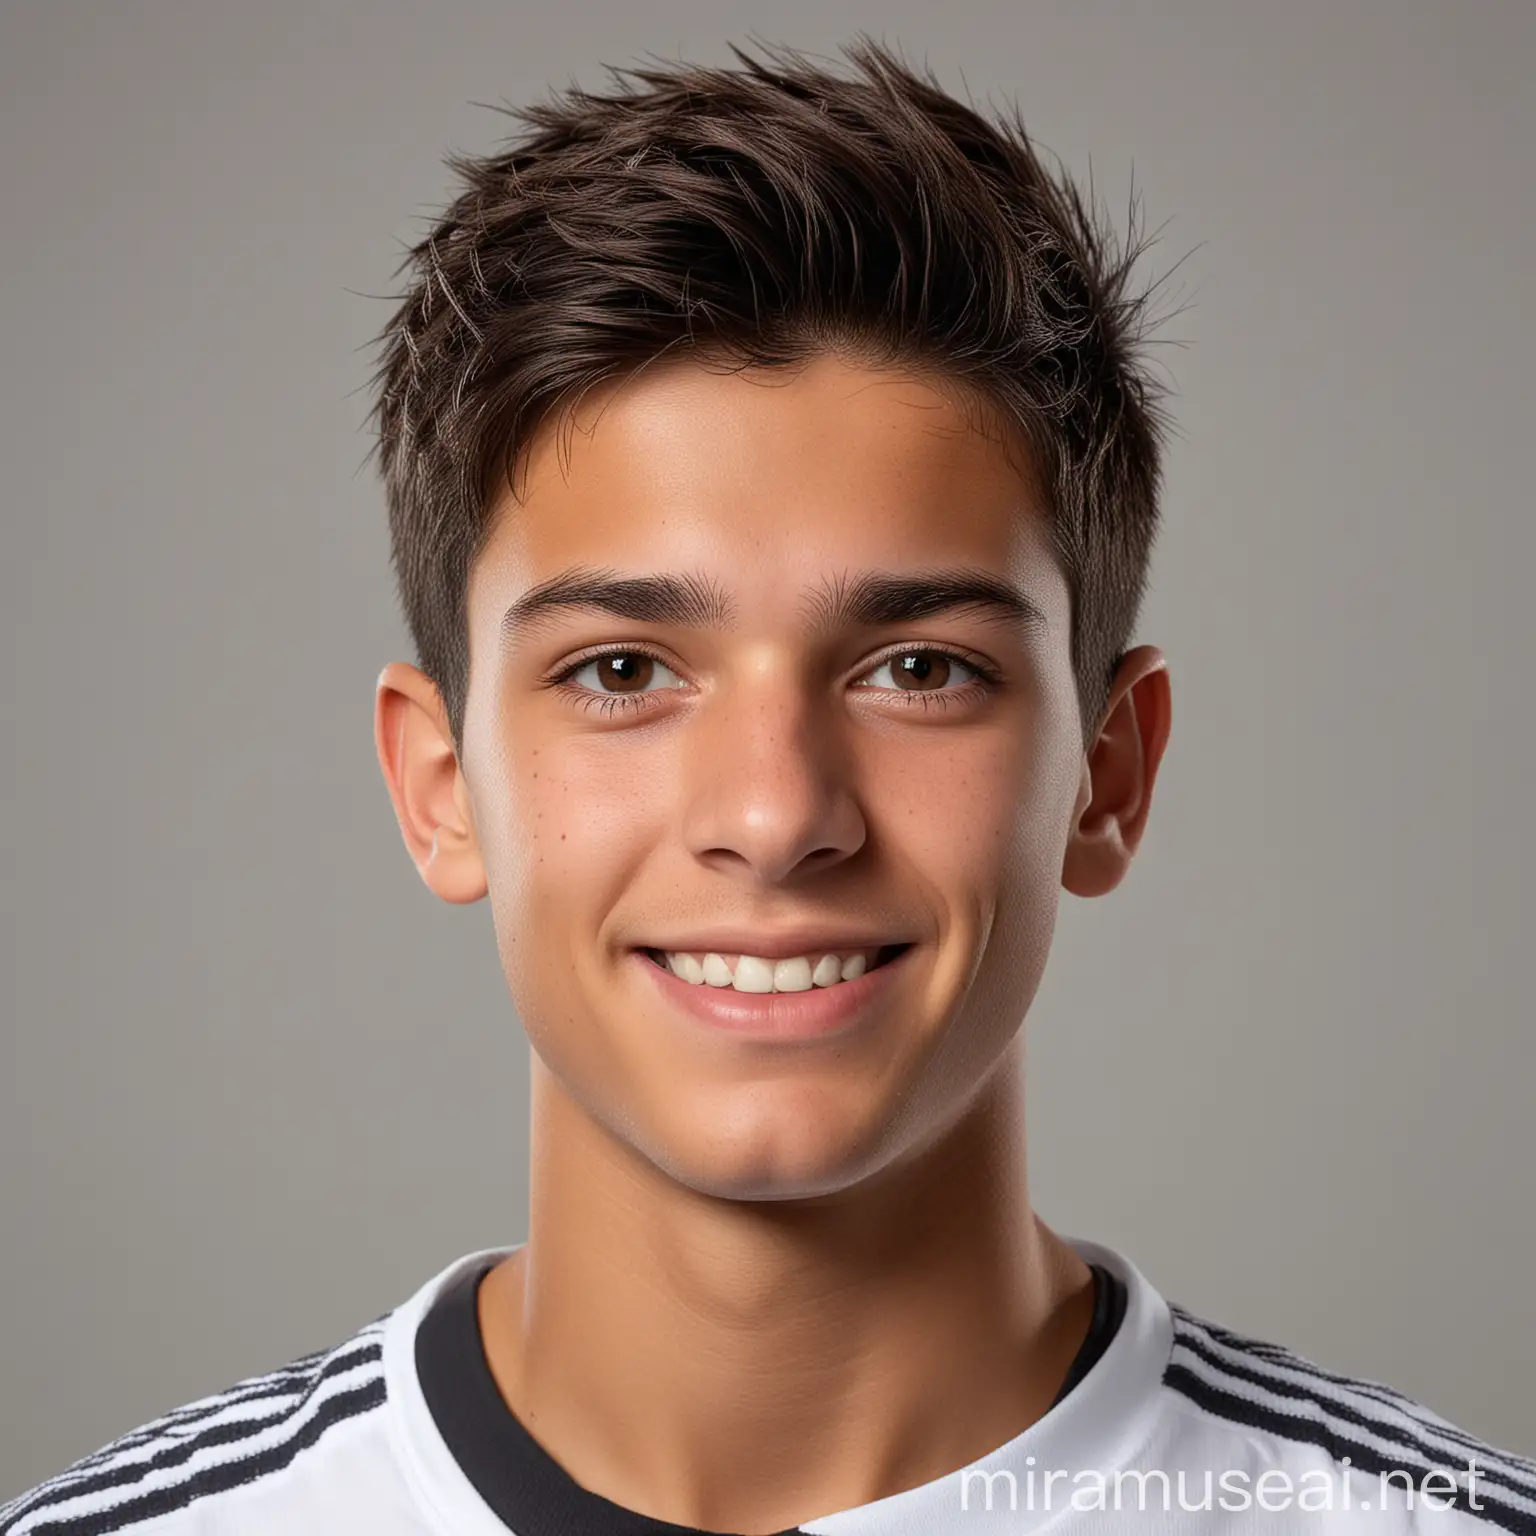 85mm DSLR colour photography of a very detailed headshot fitting all of head and hair in frame. teenager portuguese soccer player with medium length dark brown hair with a small smile, plain white shirt, grey background